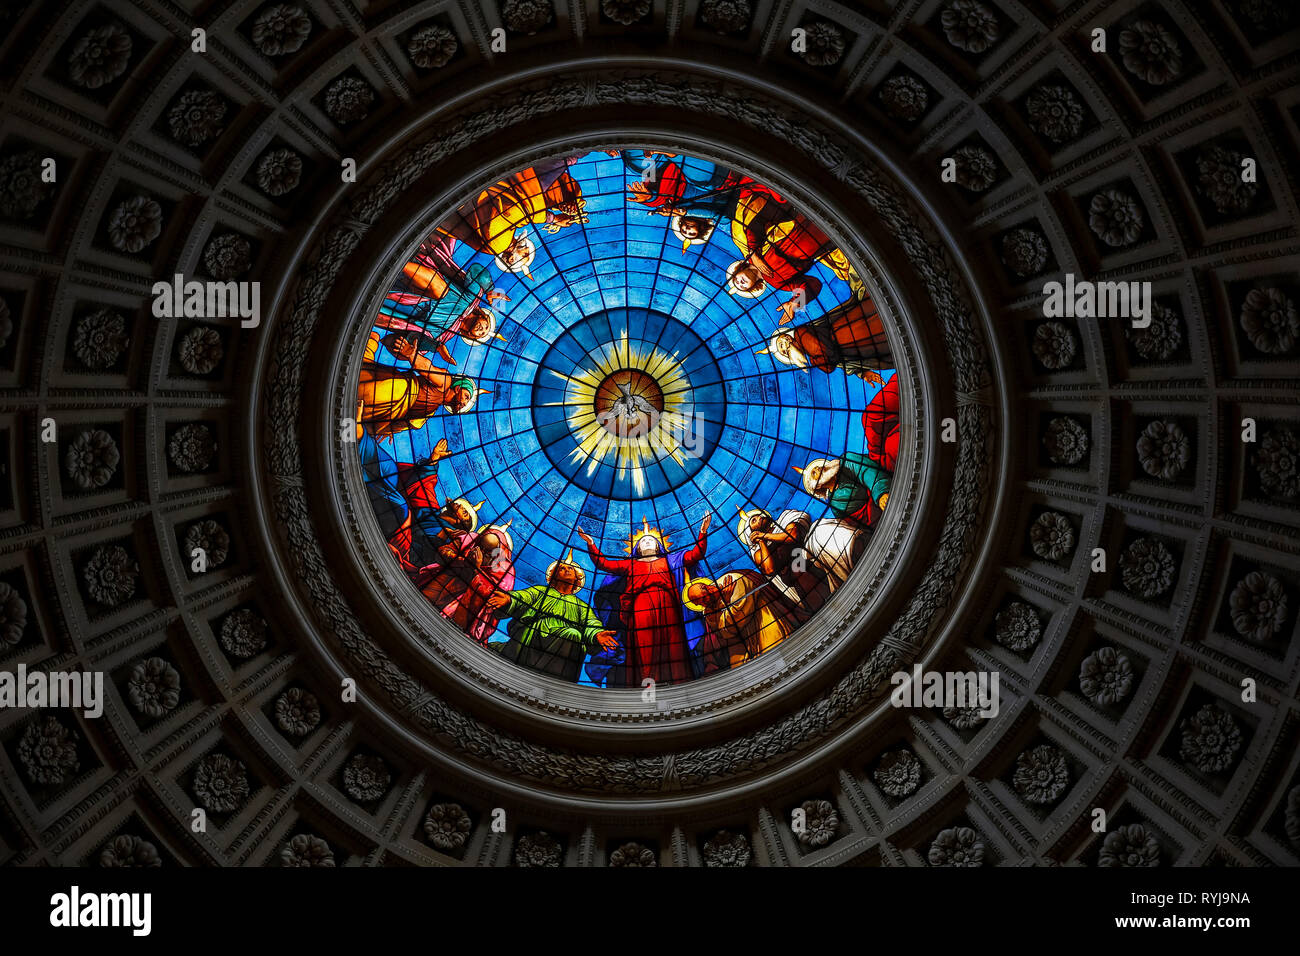 The Royal Chapel in Dreux, France. Ceiling rose window. Stock Photo